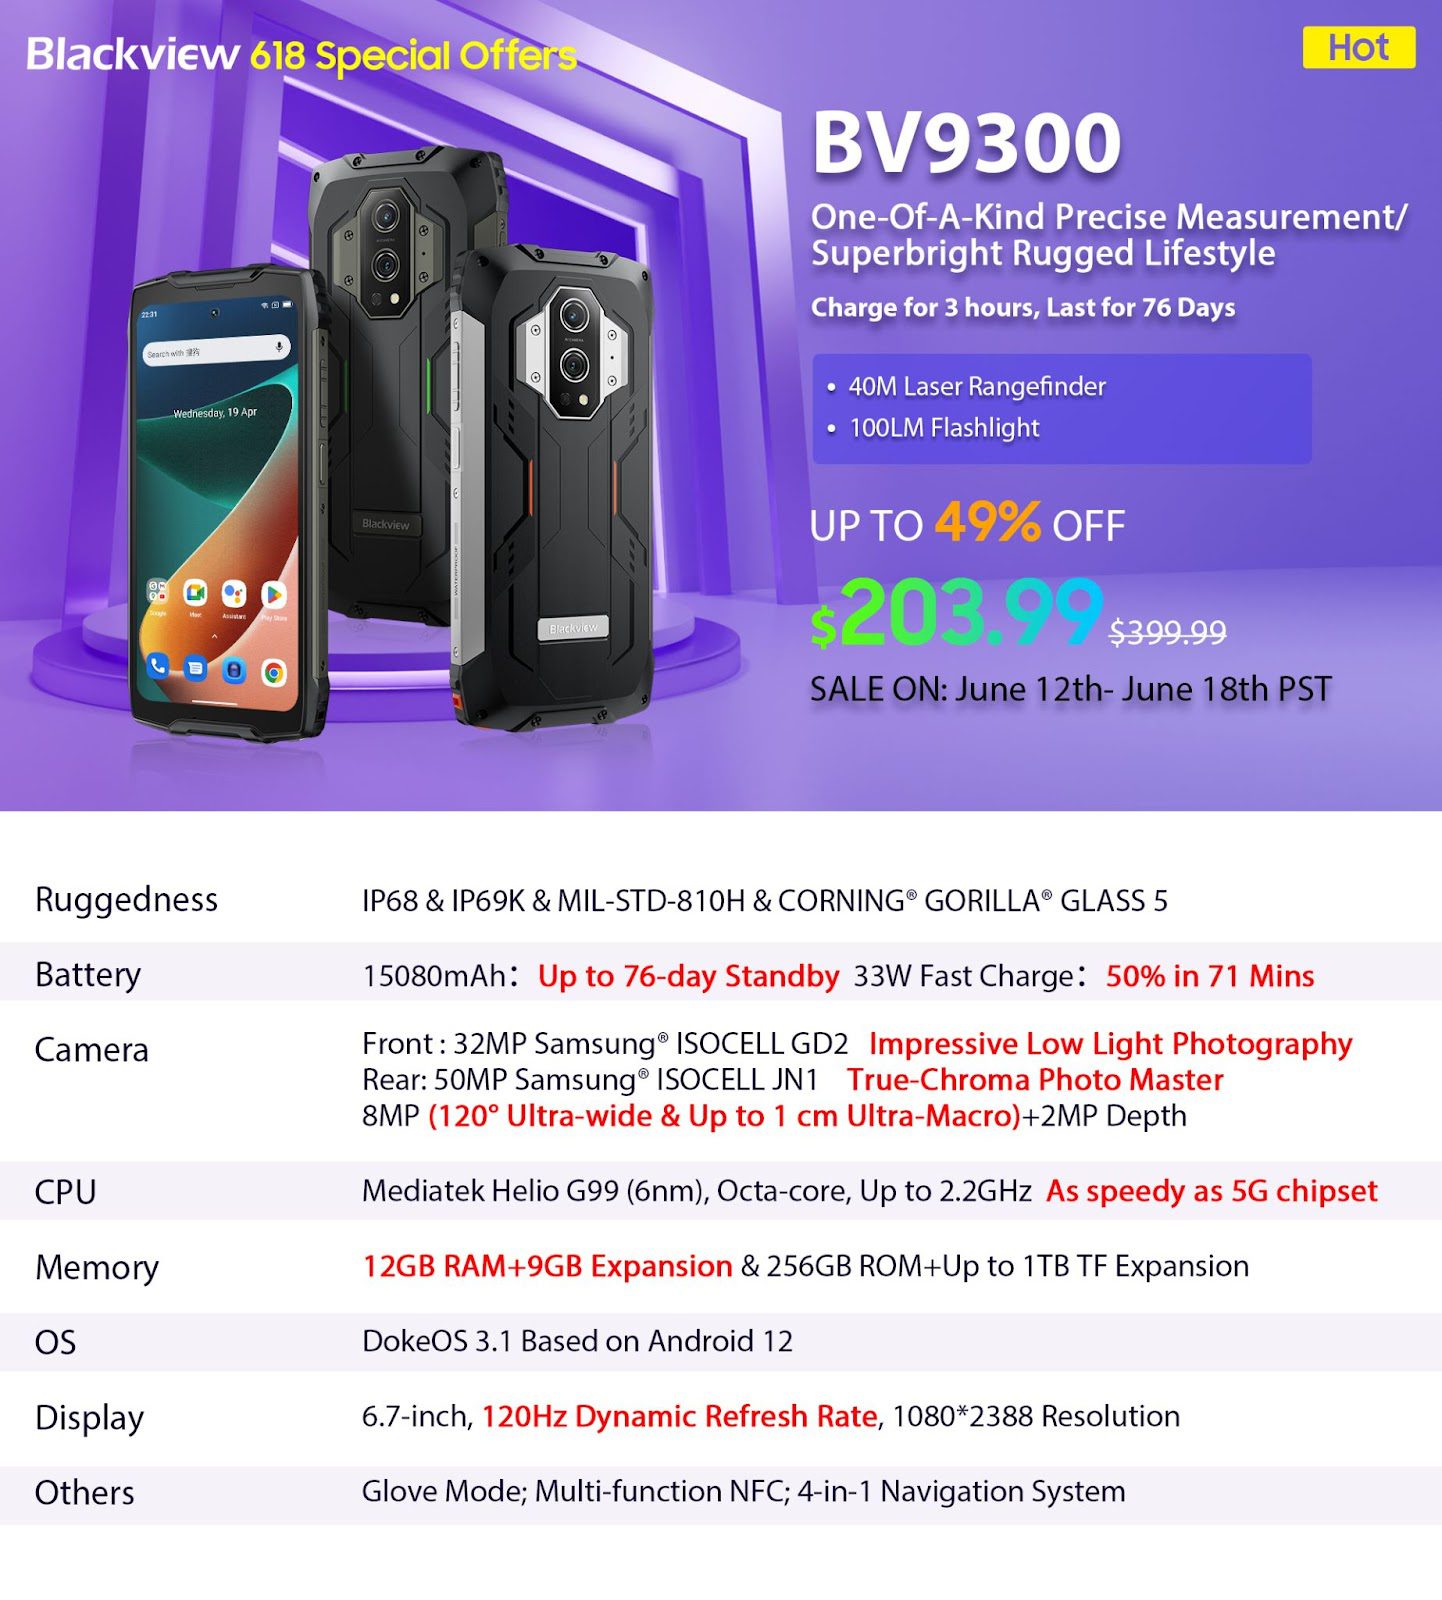 Save Up to $238.51! Blackview 618 Shopping Festival from June 12th to 18th PST